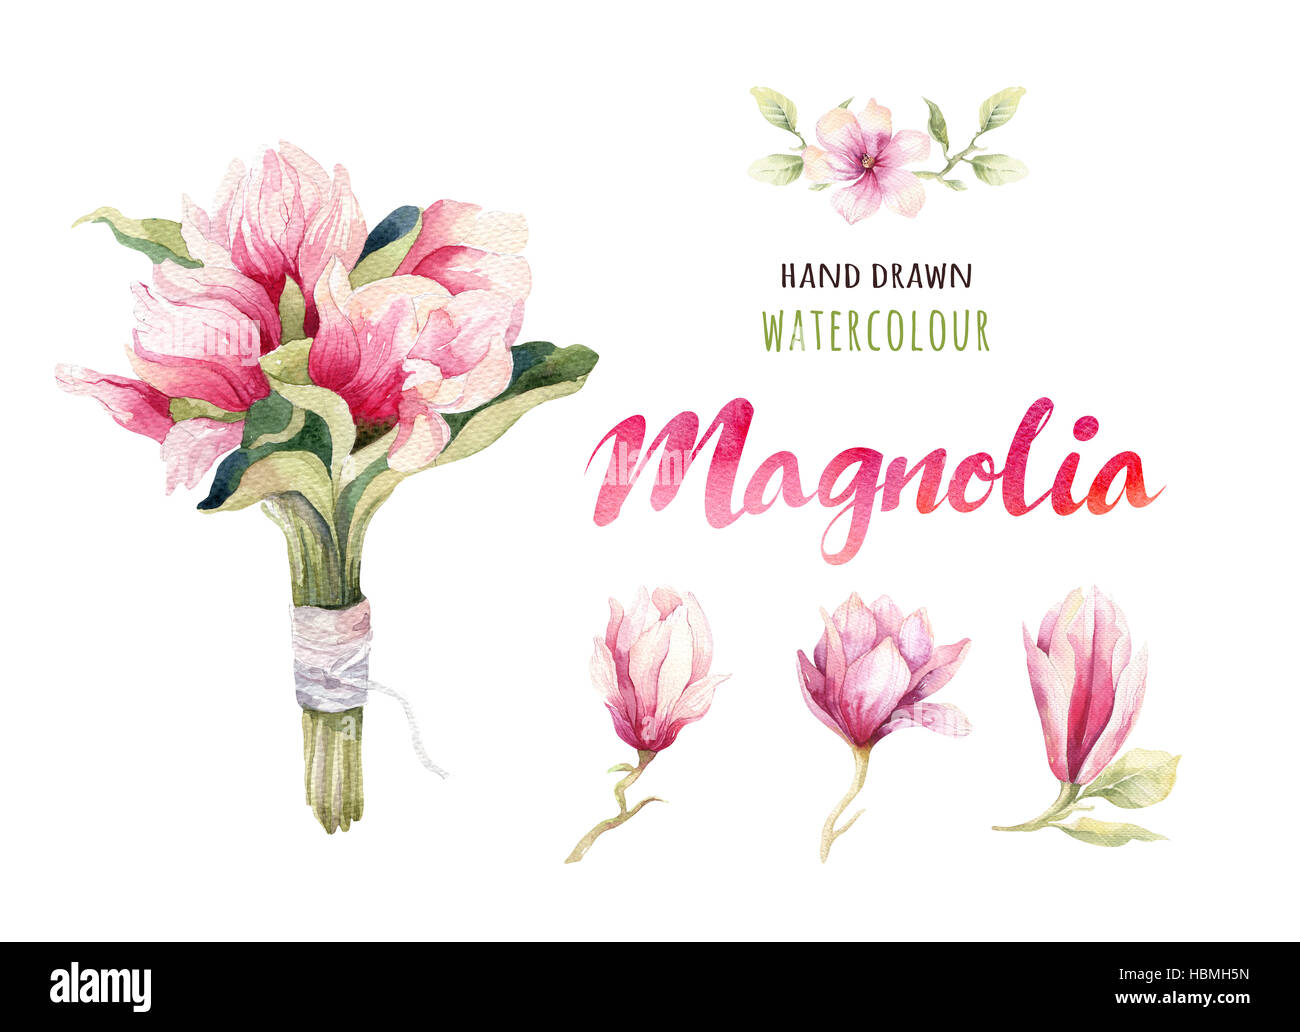 Watercolor Painting Magnolia blossom flower wallpaper decoration Stock Photo